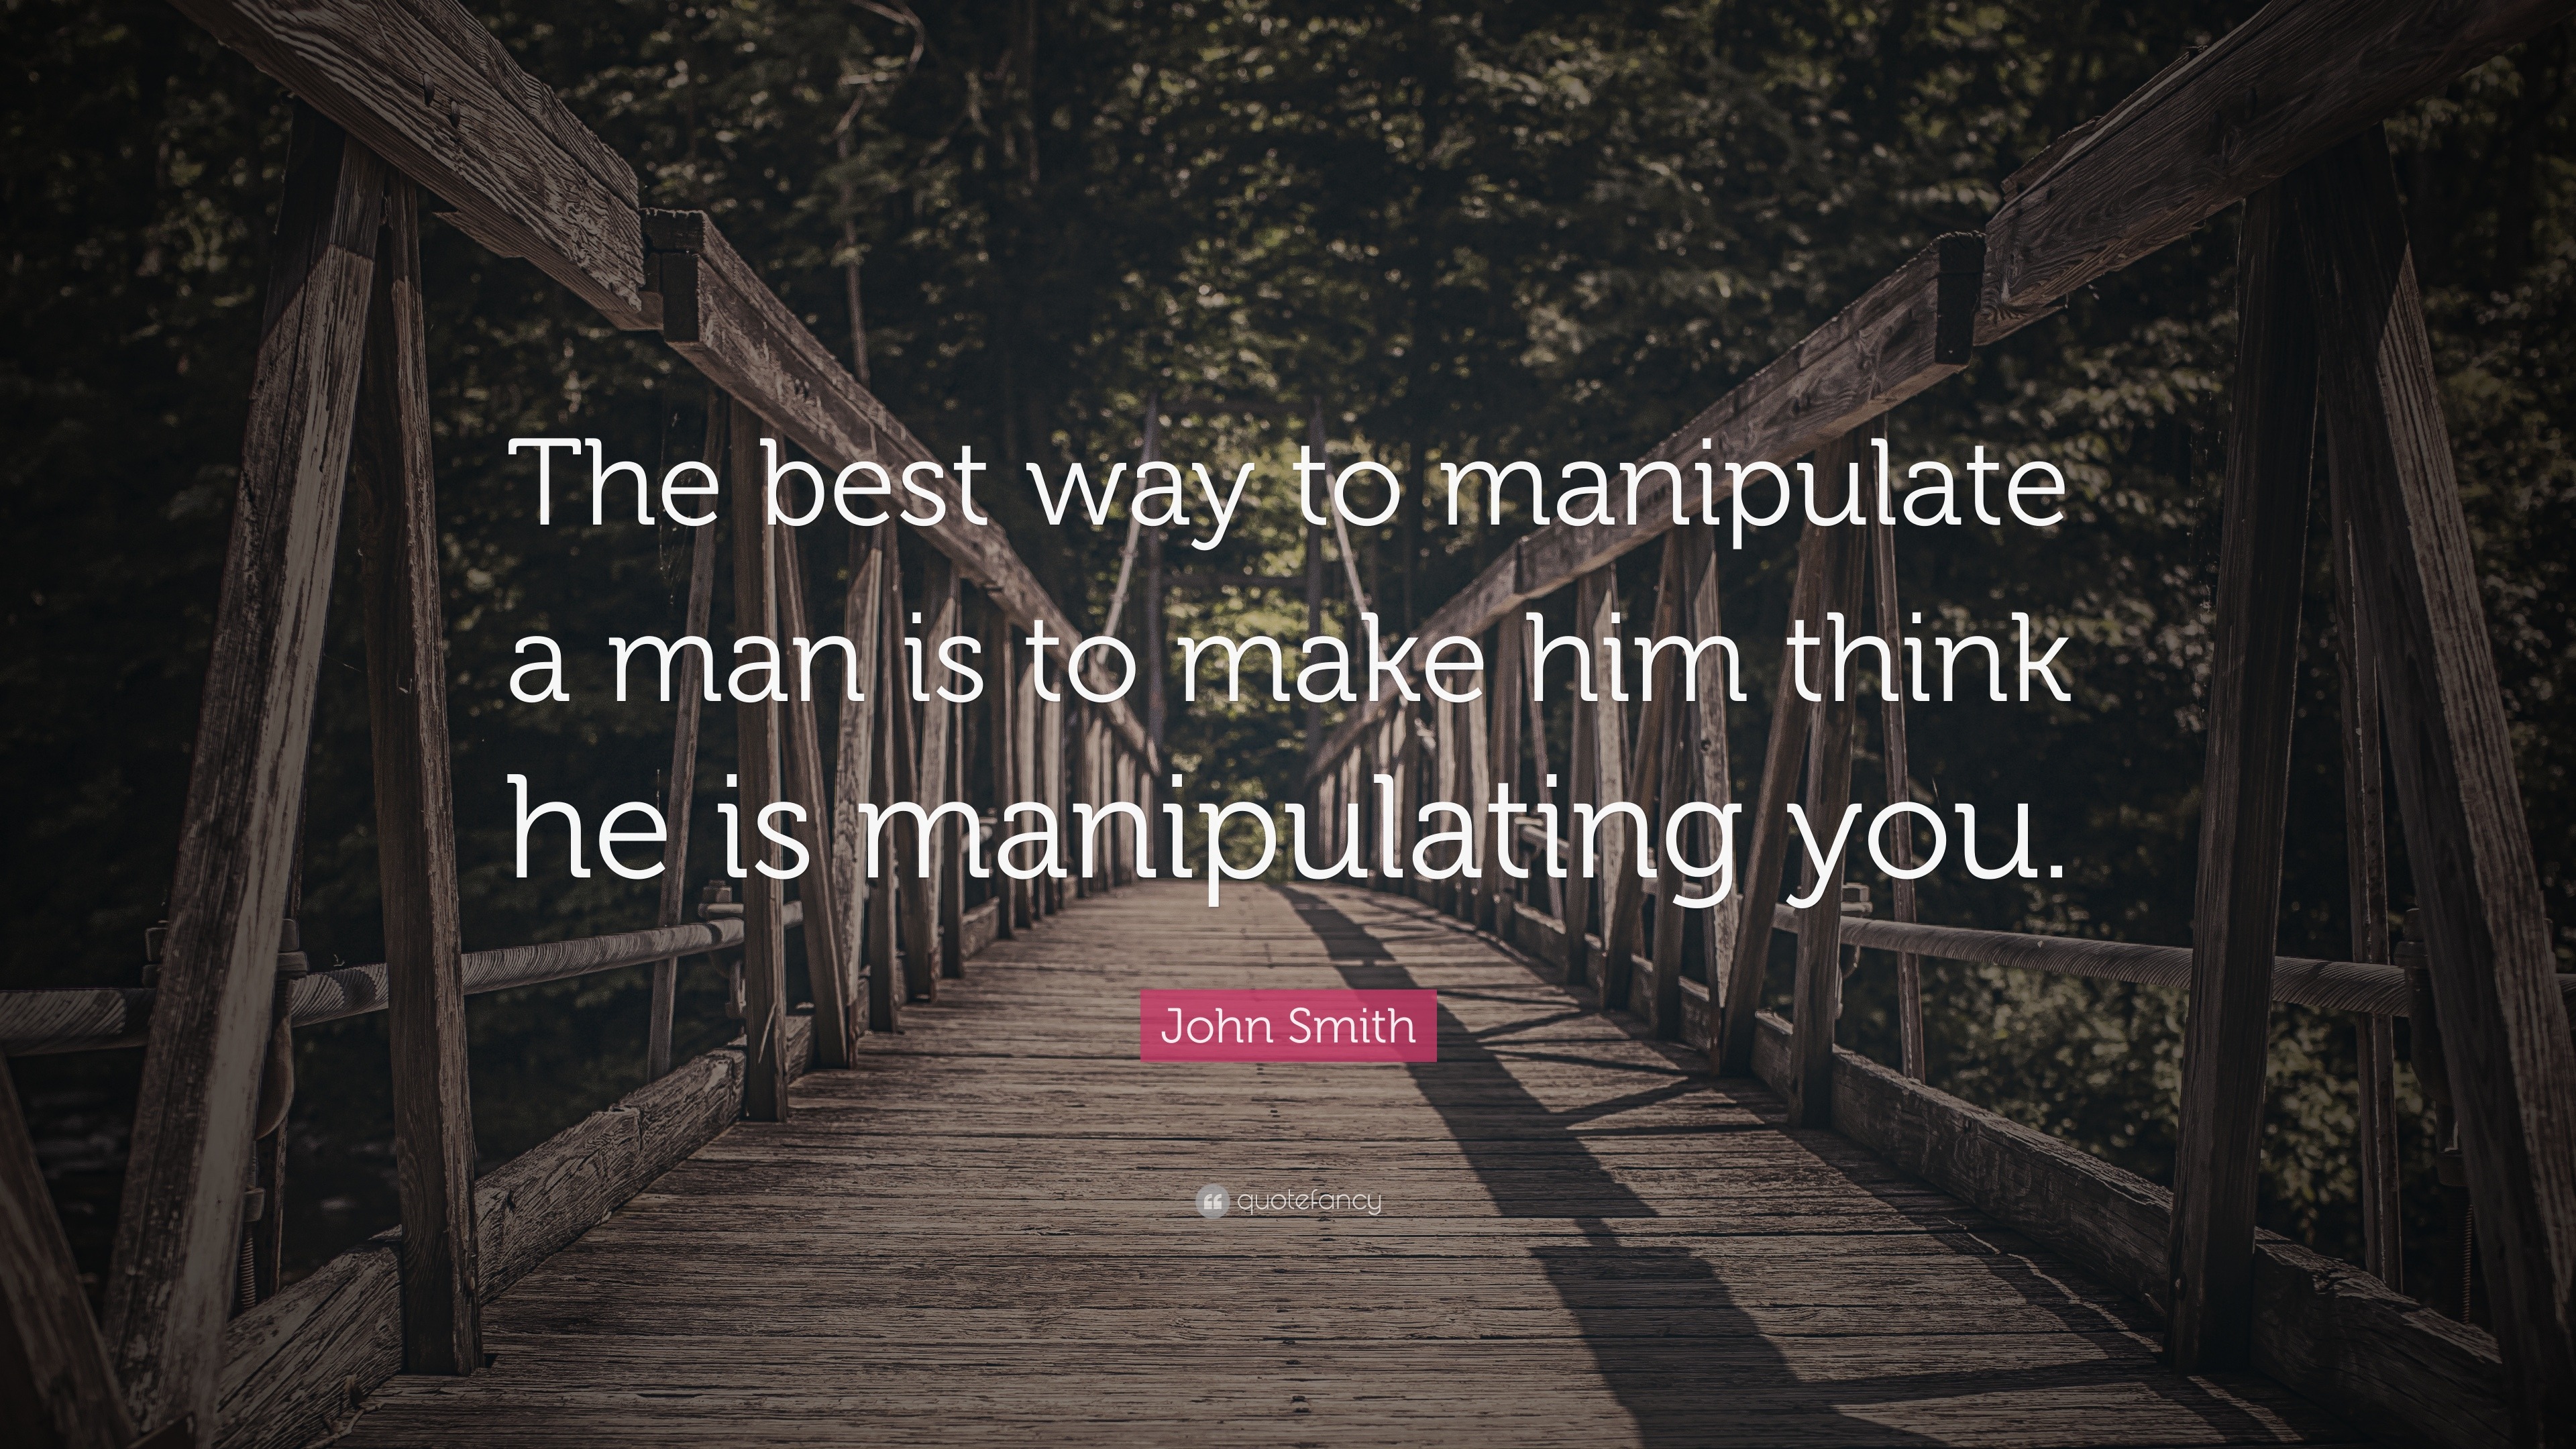 John Smith Quote “the Best Way To Manipulate A Man Is To Make Him Think He Is Manipulating You ”